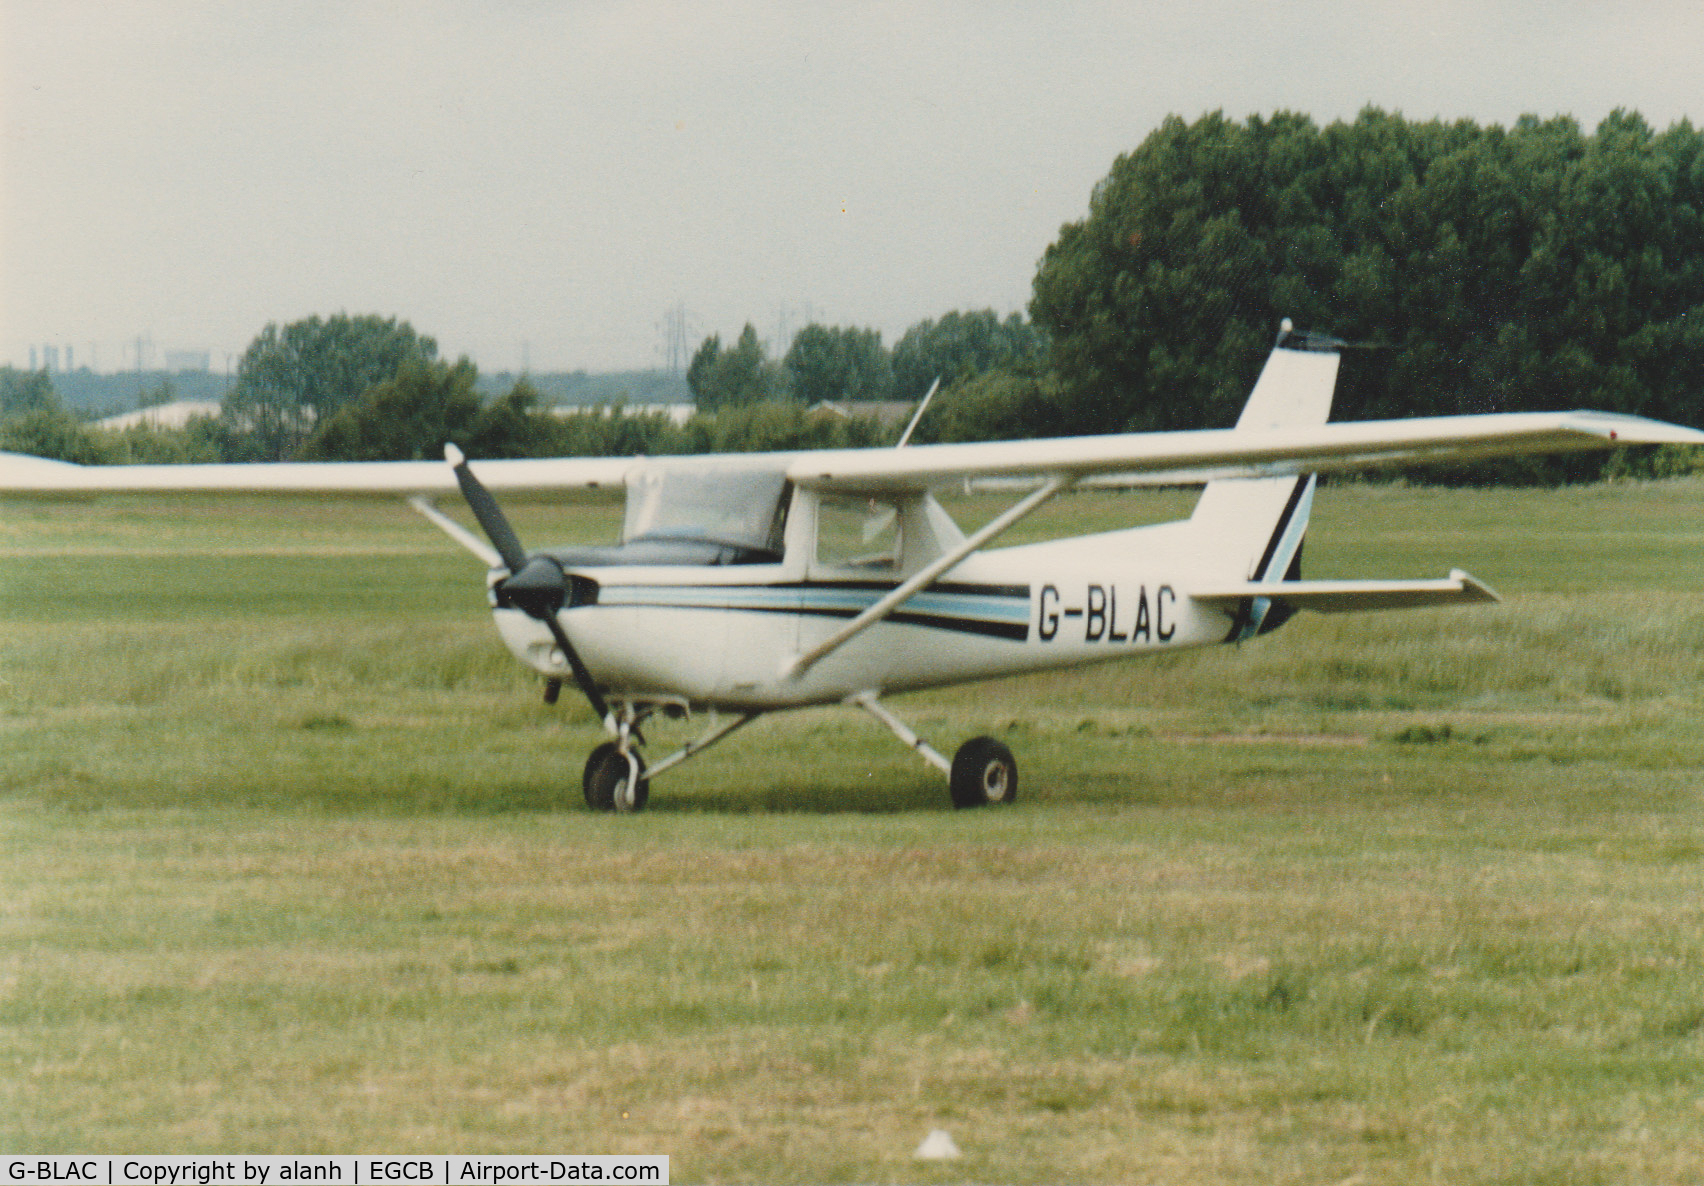 G-BLAC, 1980 Reims FA152 Aerobat C/N 0370, Pictured at Barton Aerodrome (as it then was), circa 1982, owned by the Lancashire Aero Club and used for flight training - taken after a trial flying lesson!